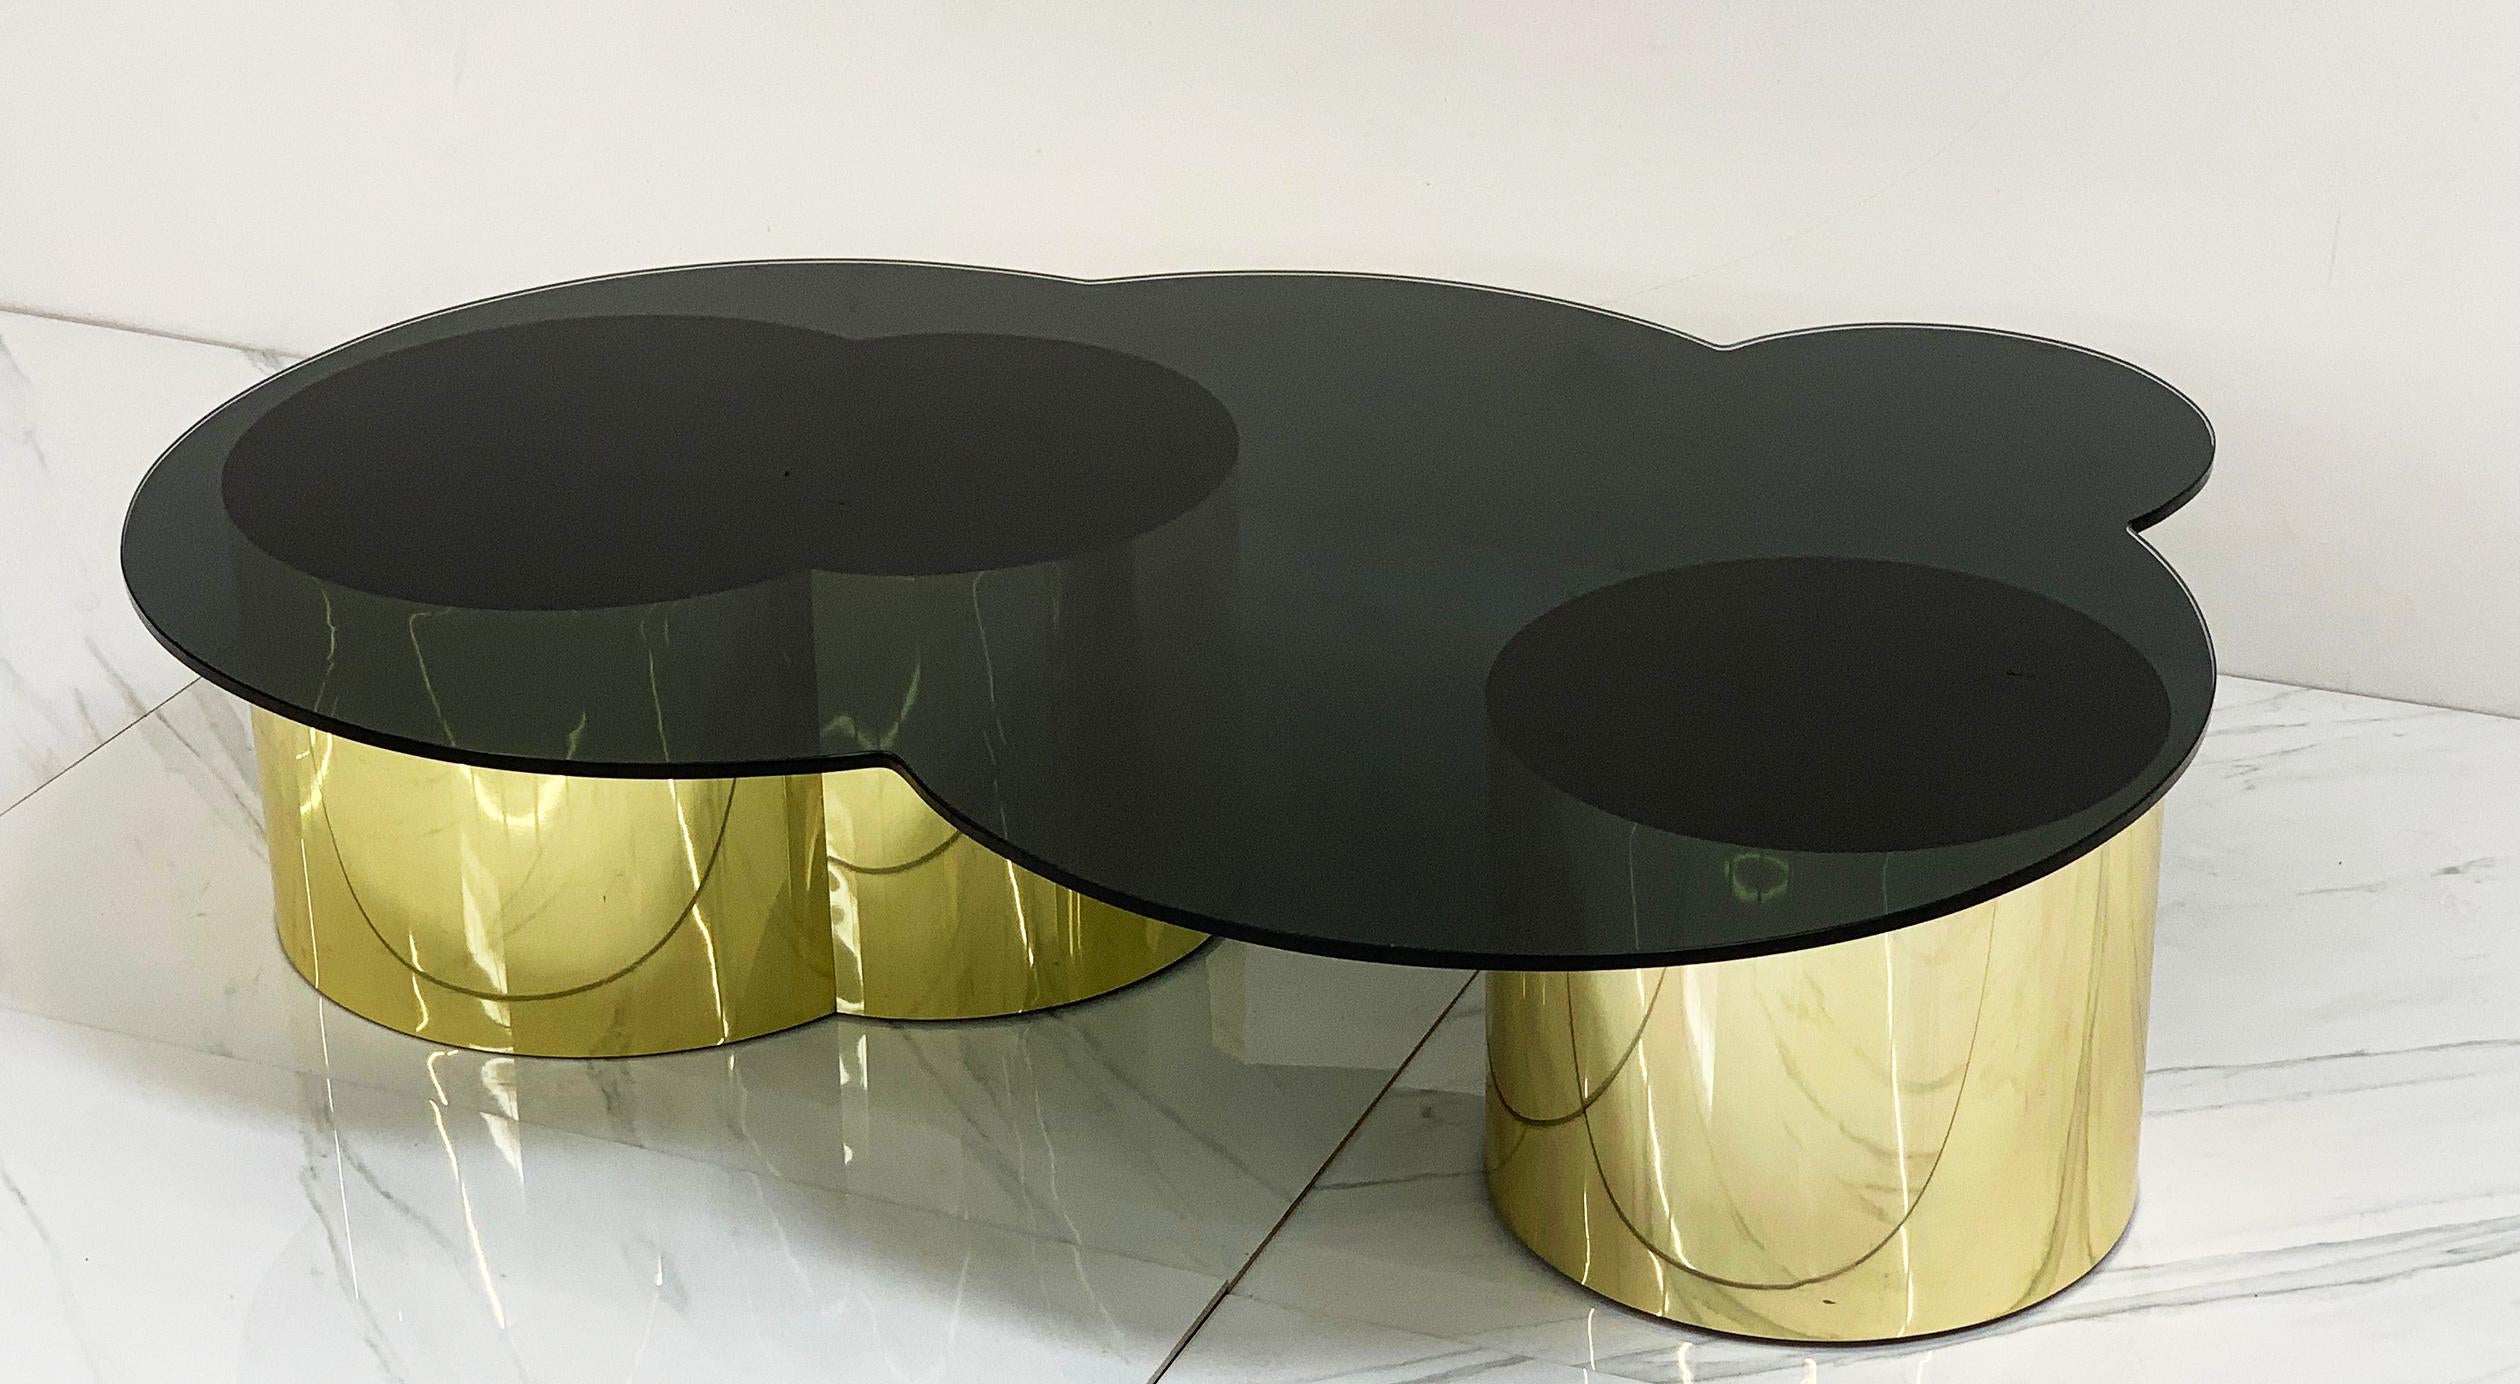 Free Form Biomorphic Brass and Glass Coffee Table, 1970's For Sale 3